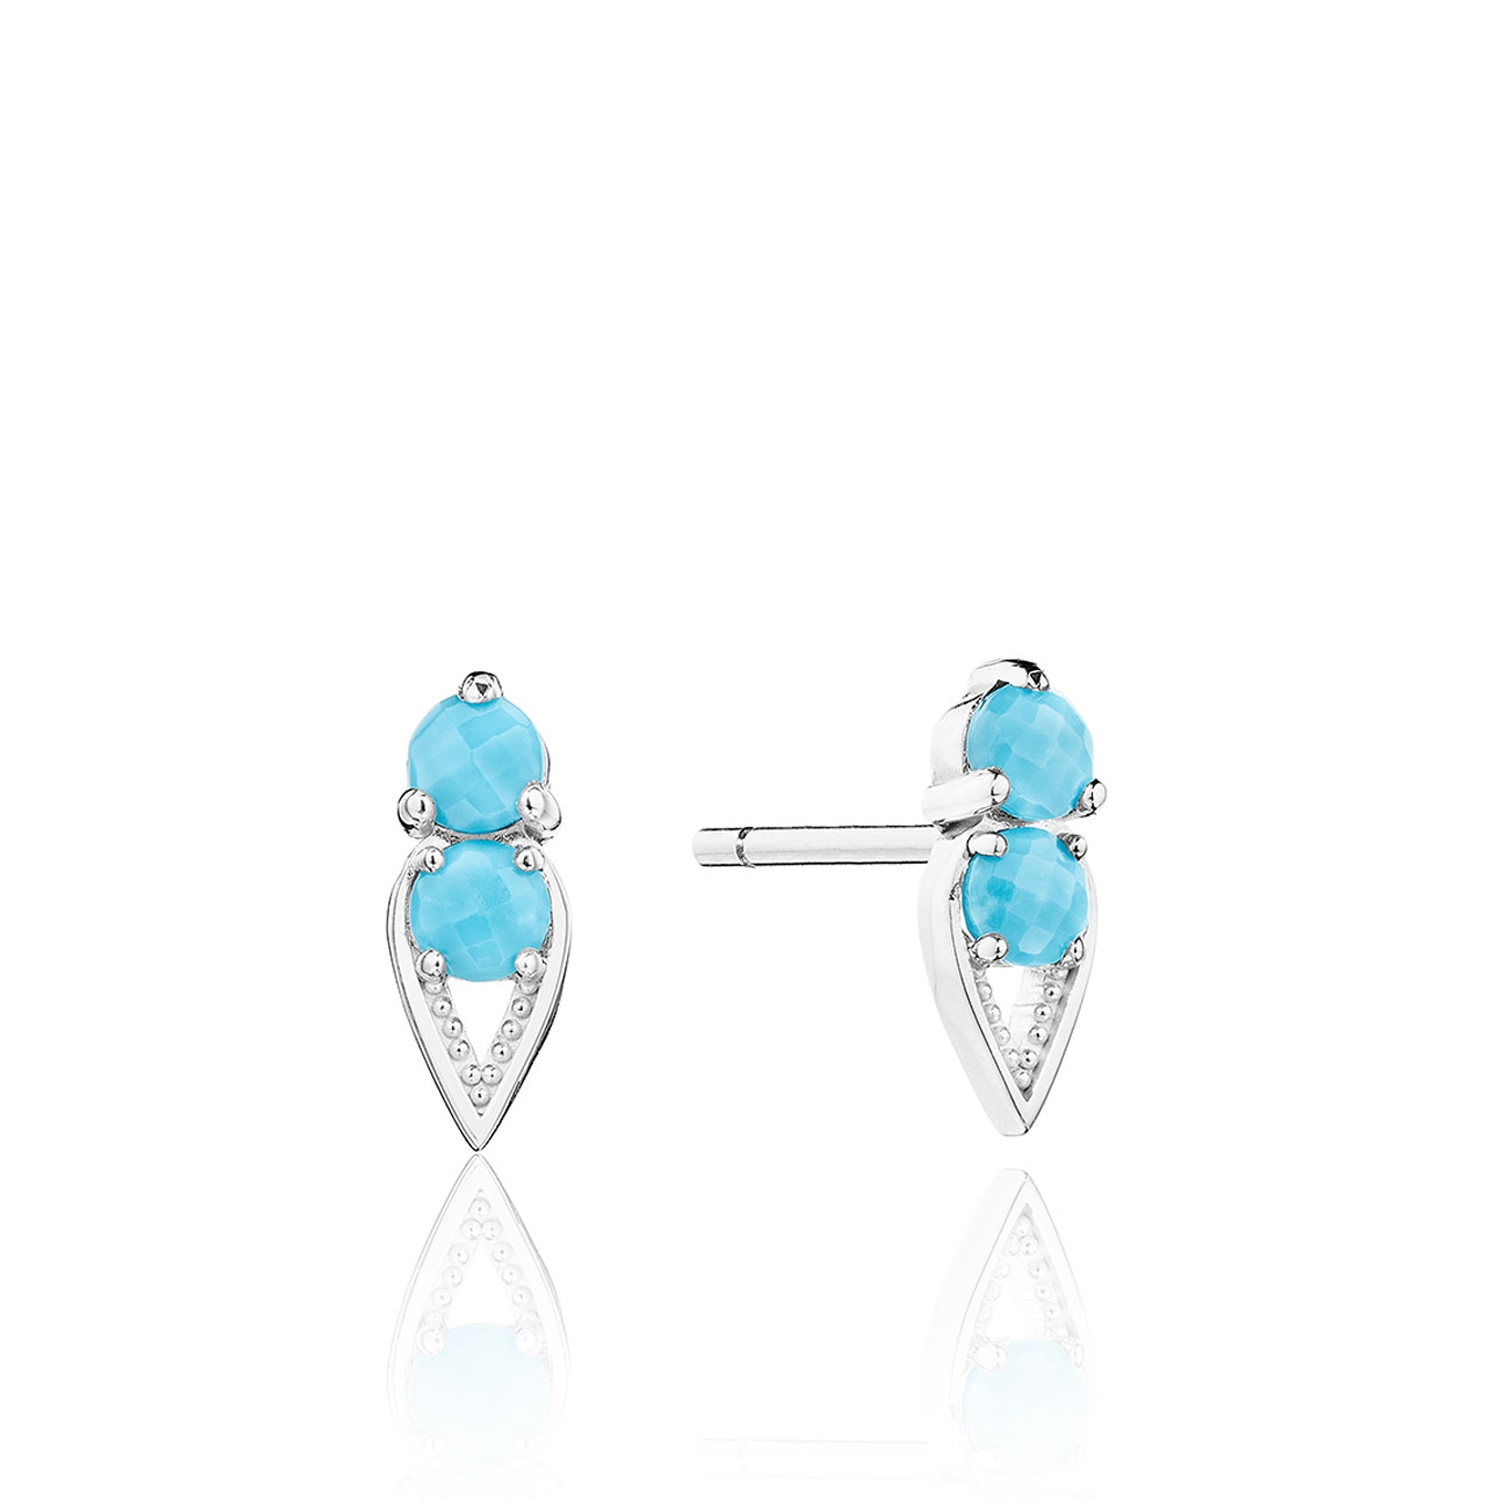 Tacori SE25548 Petite Open Crescent Earrings with Turquoise